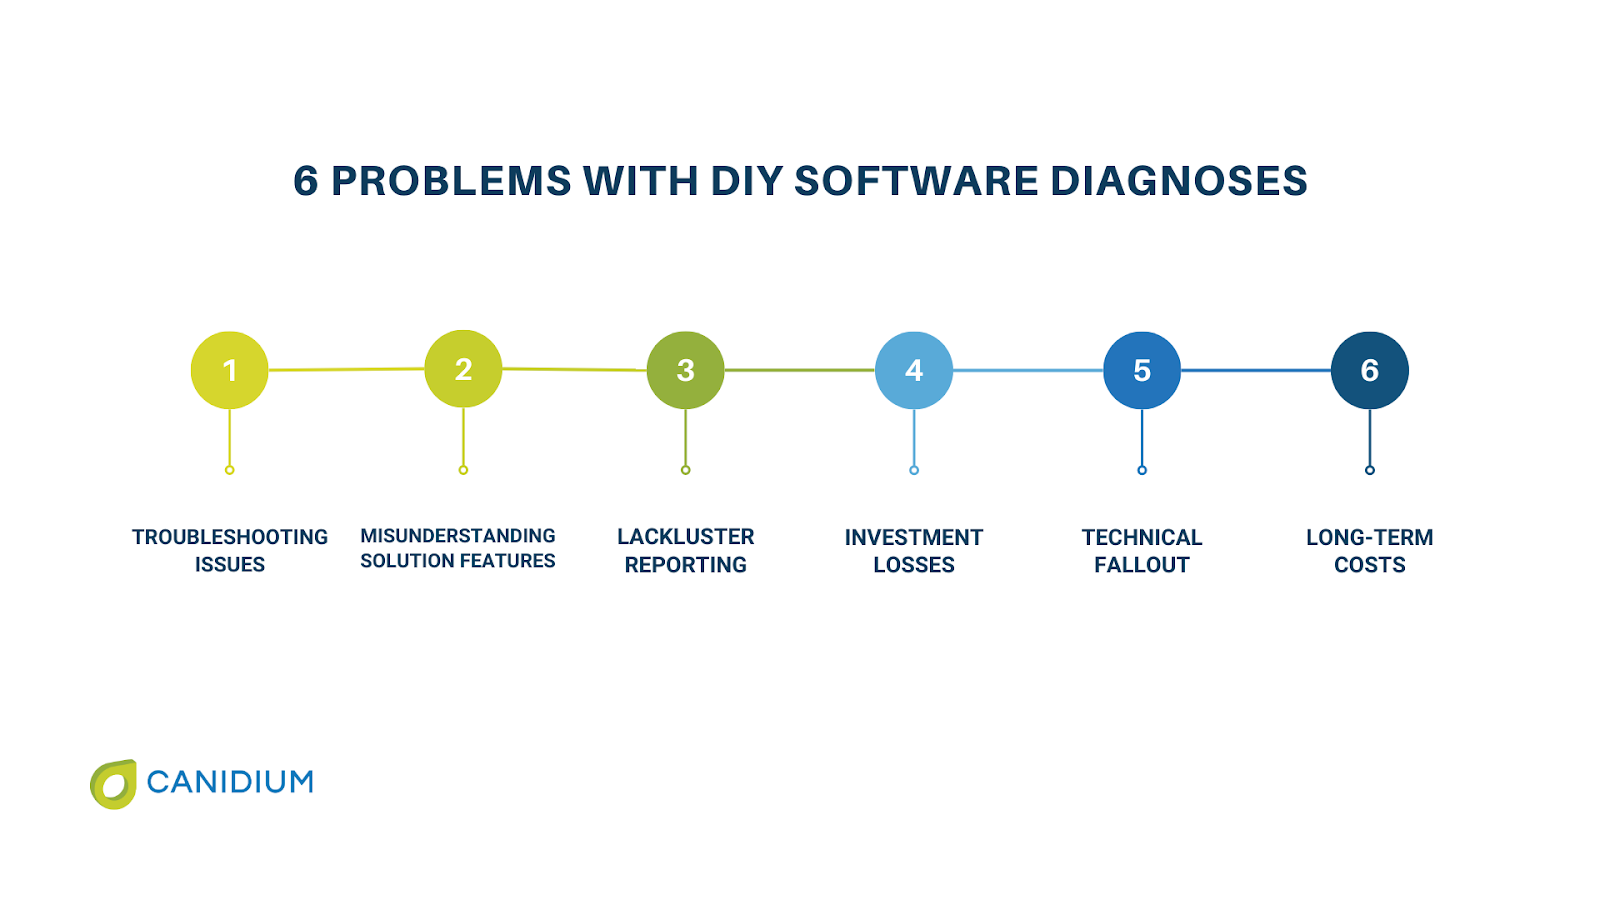 6 problems with DIY software diagnoses